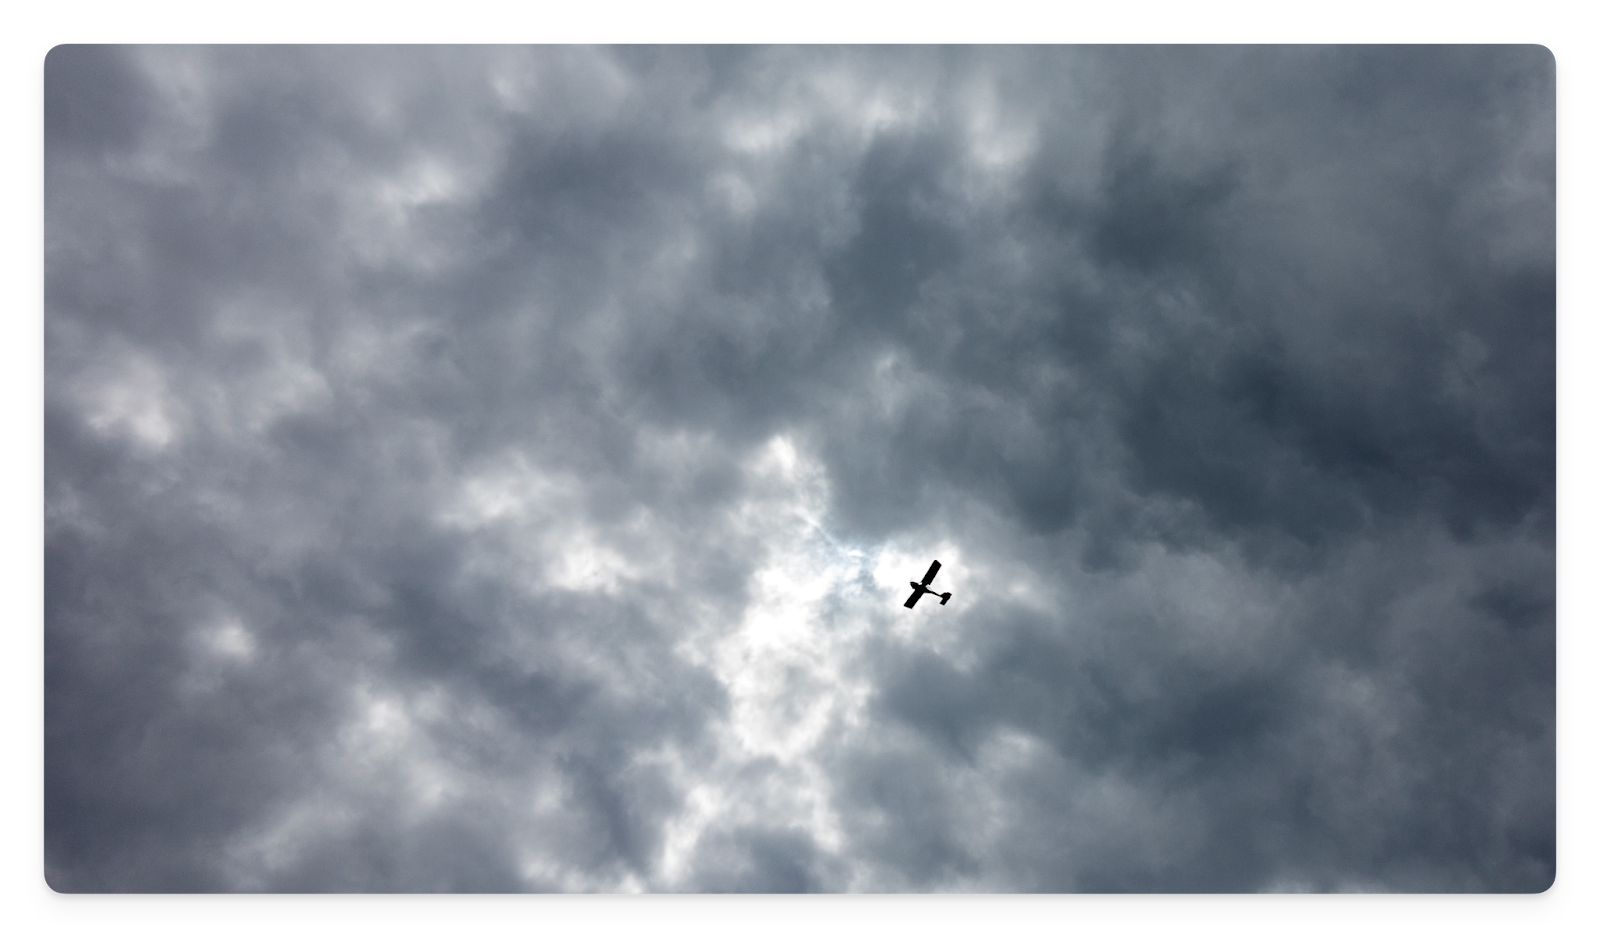 An airplane flying under overcast clouds.